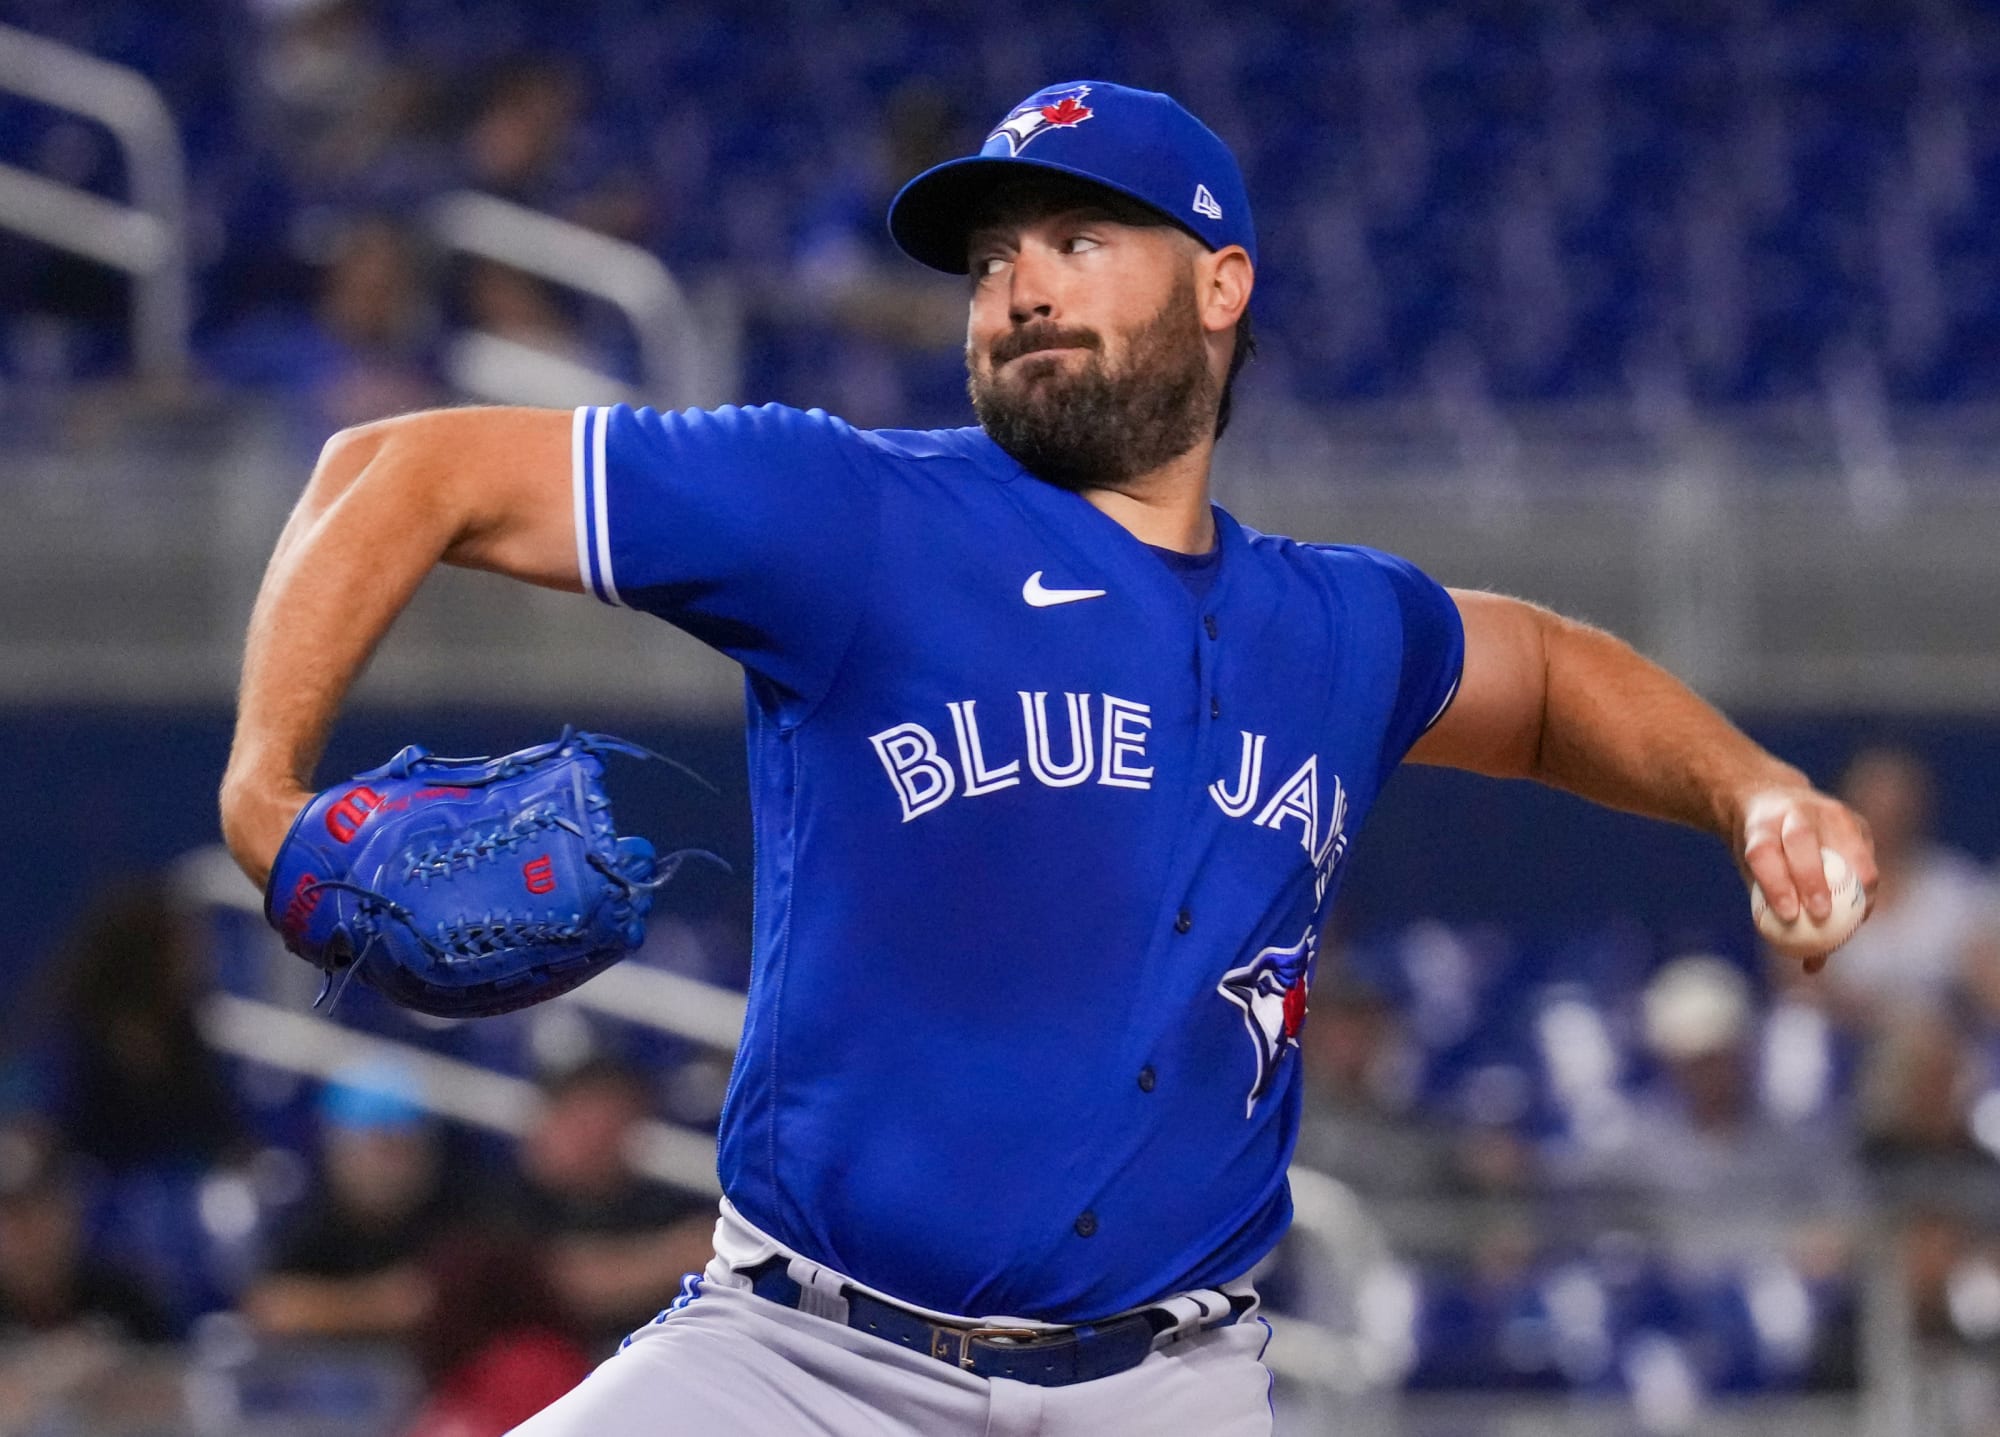 Blue Jays pitchers haven't been affected by MLB's sticky substance